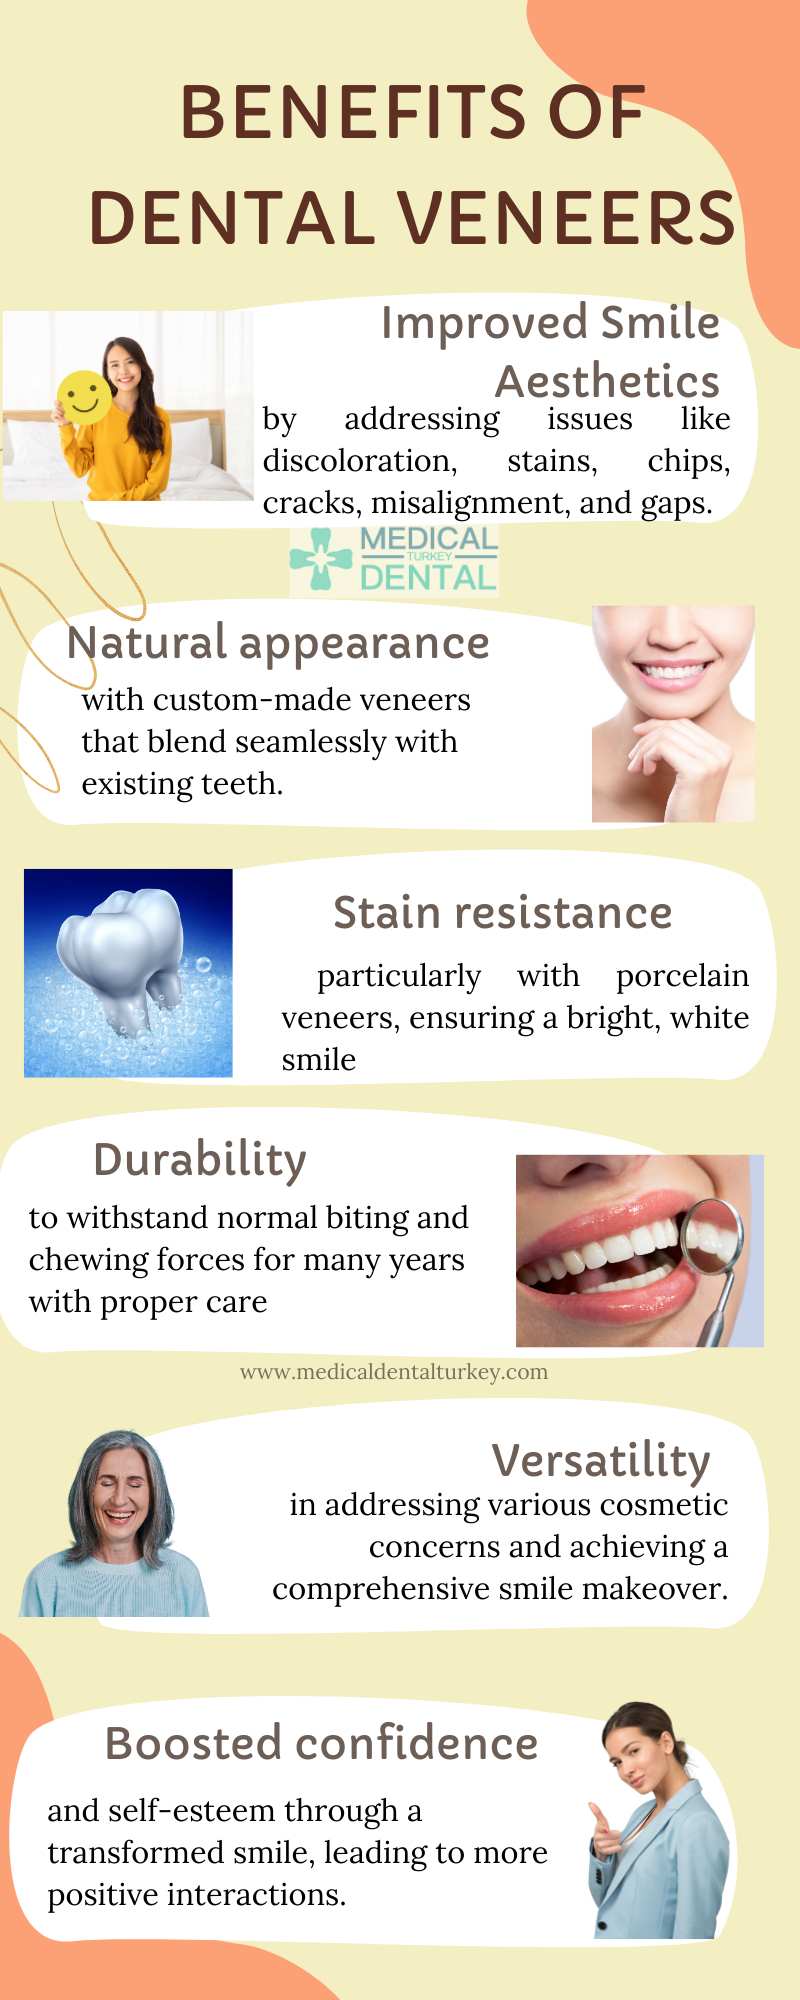 Benefits of dental venners infographic